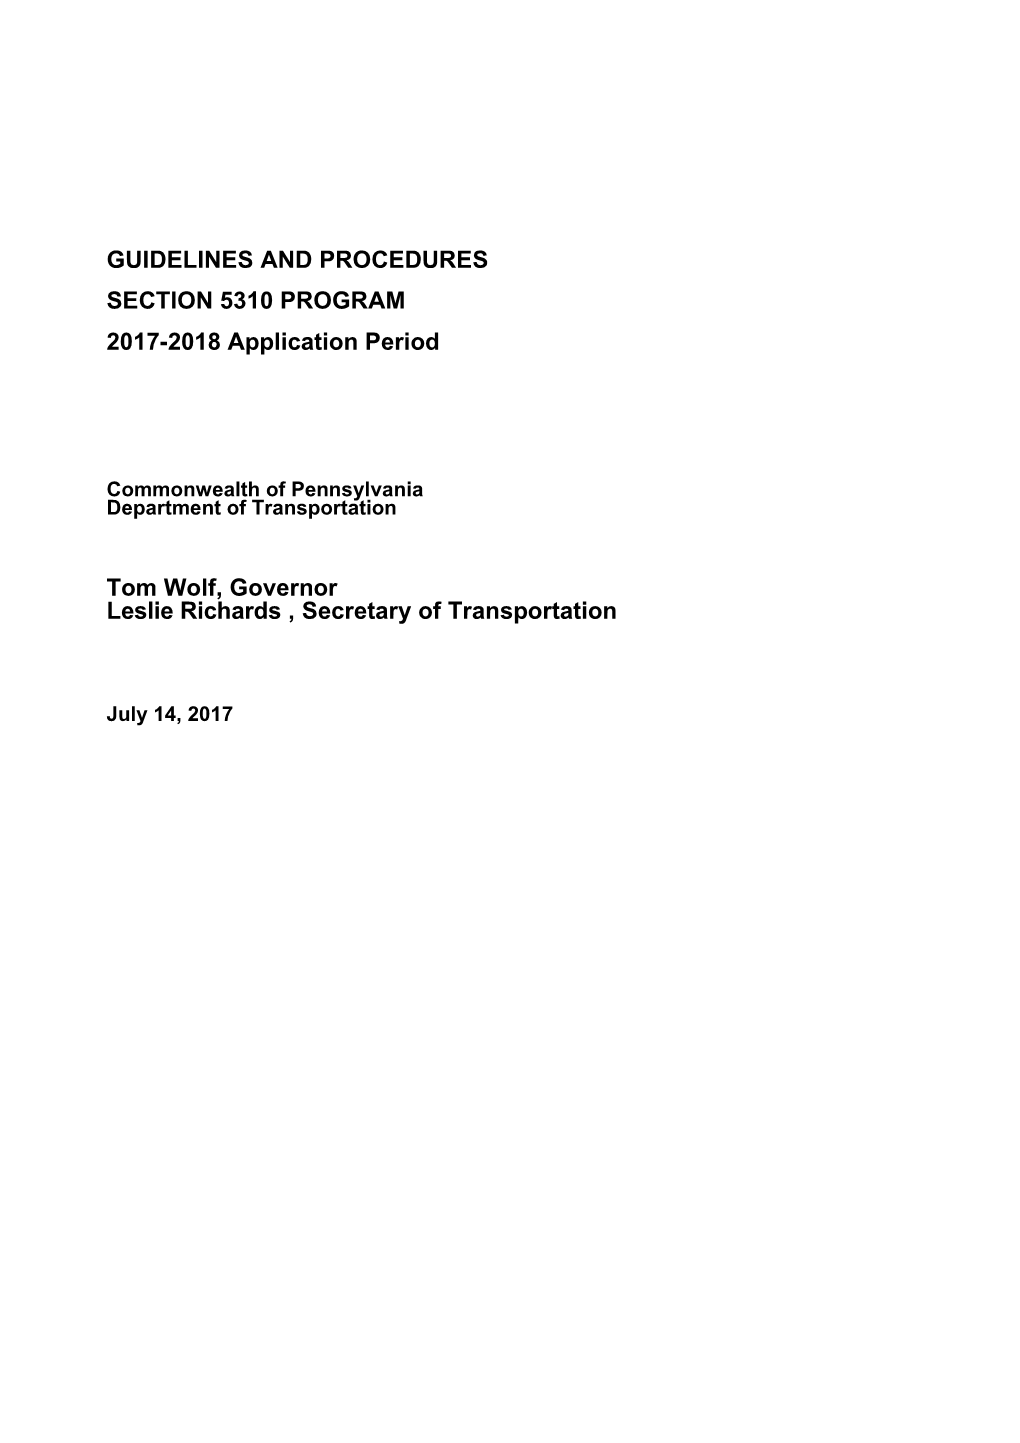 Guidelines and Procedures Section 5310 Program